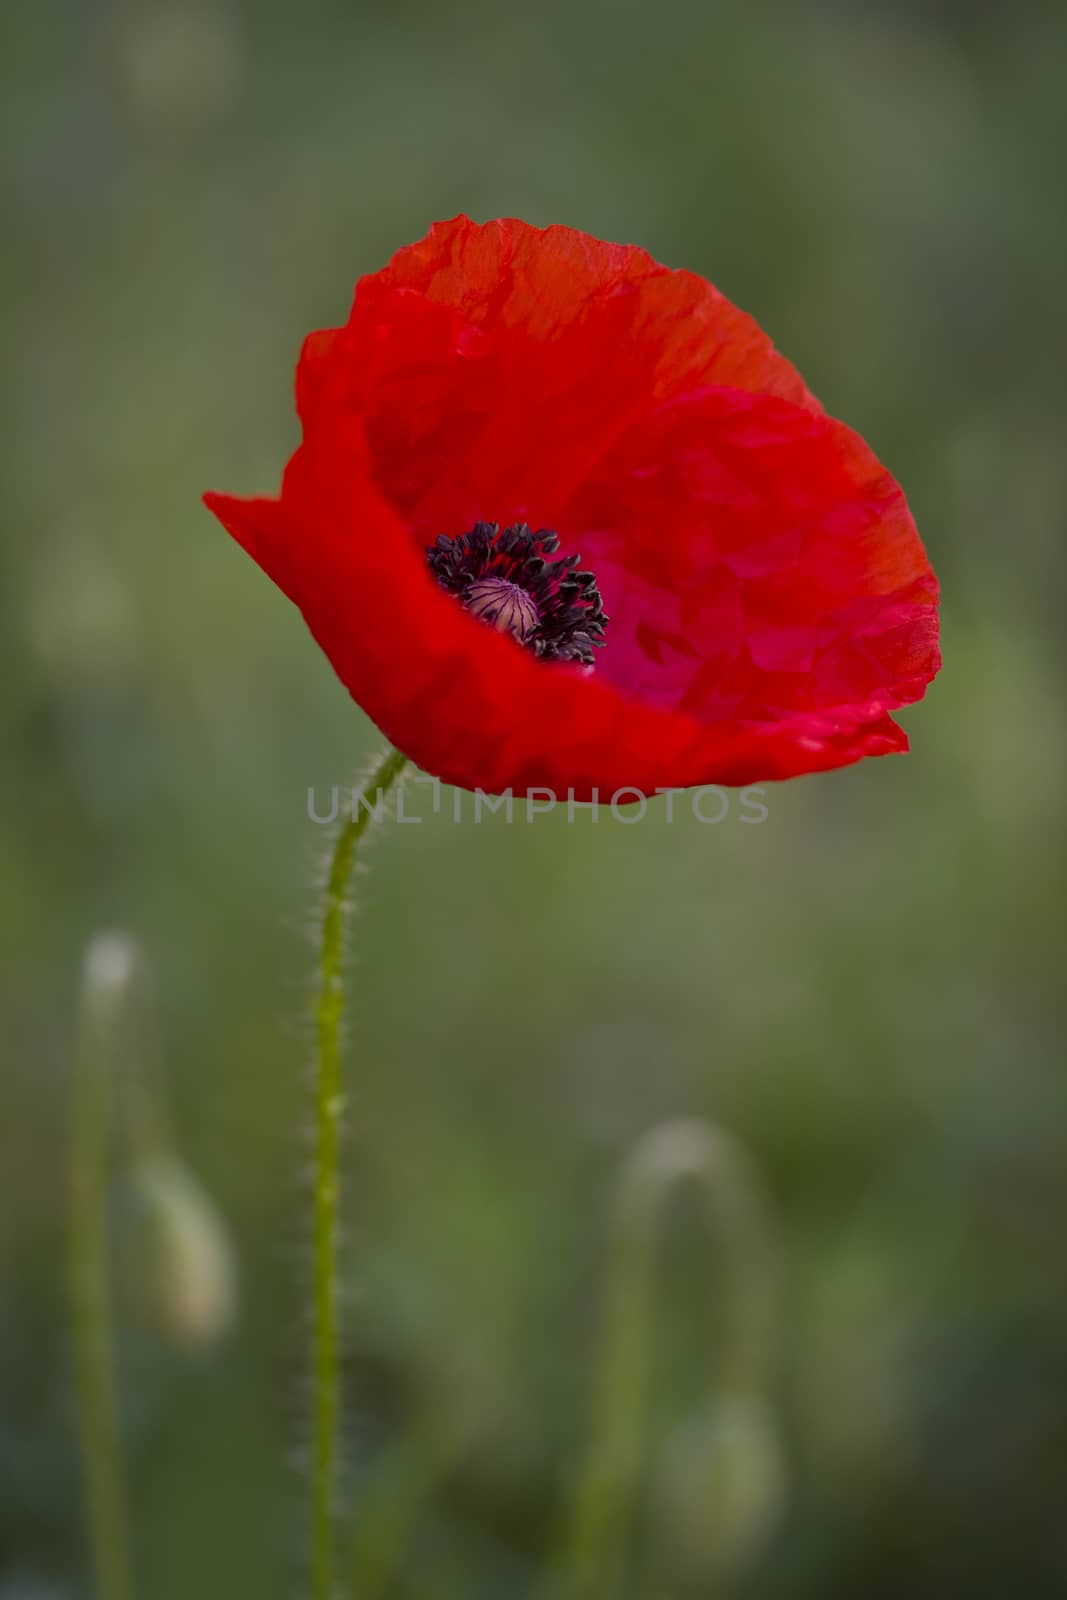 Blooming poppy by aniad